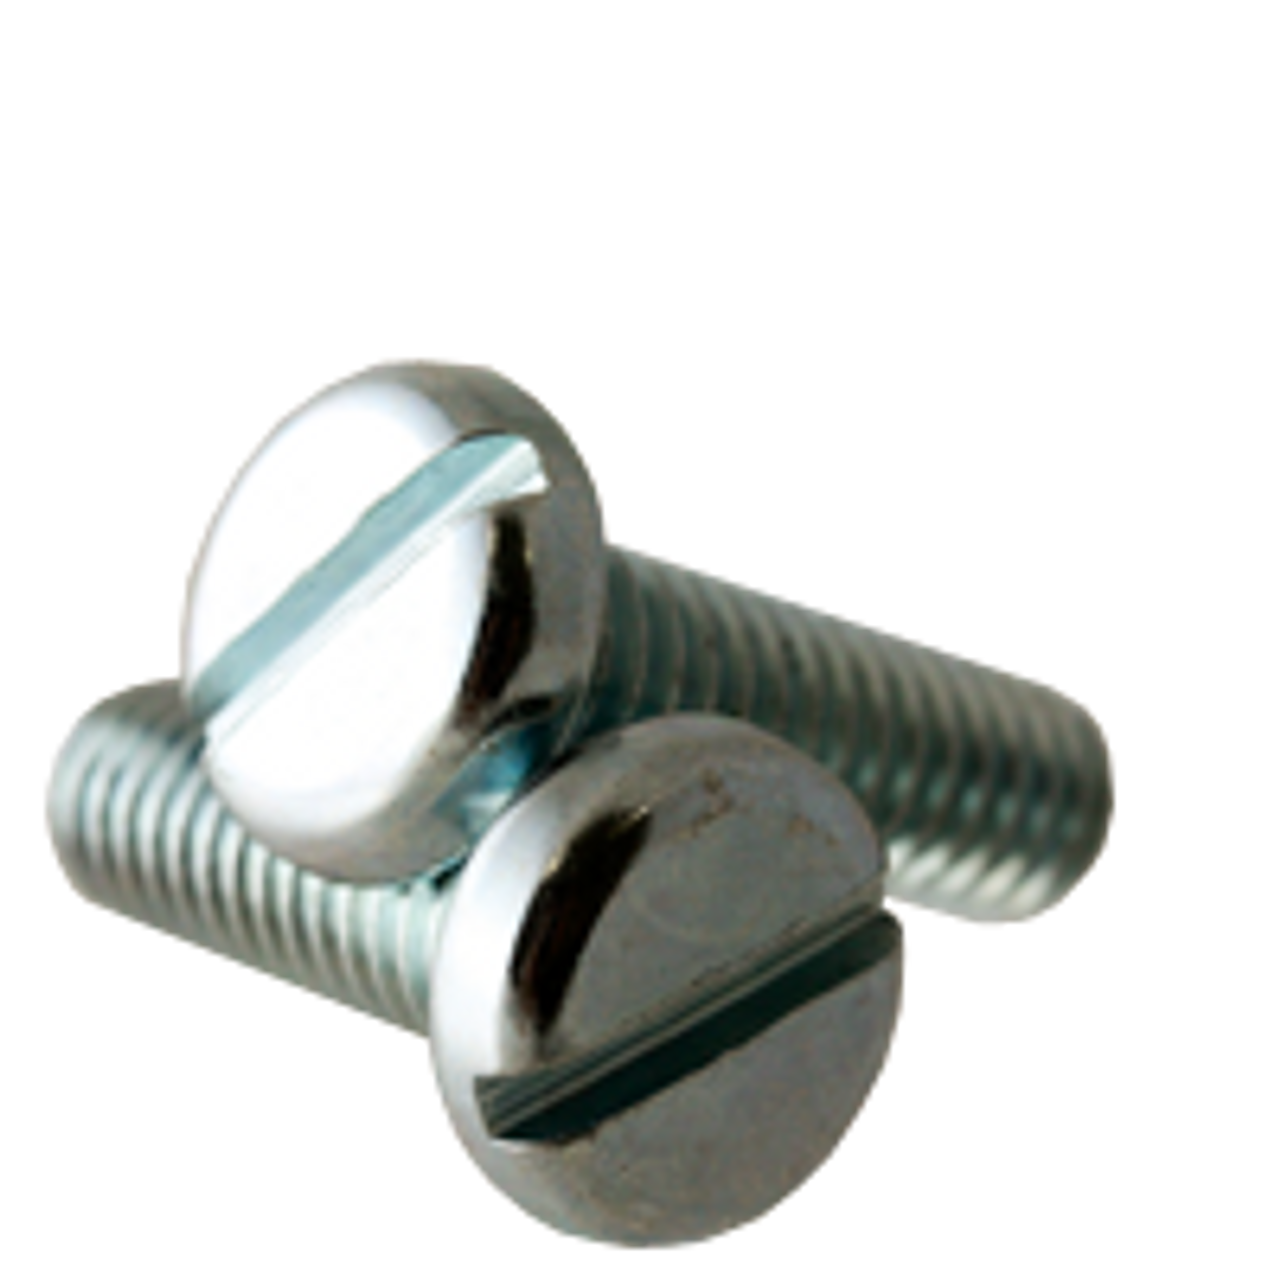 Common Fastener Heads For A Screw Or Bolt